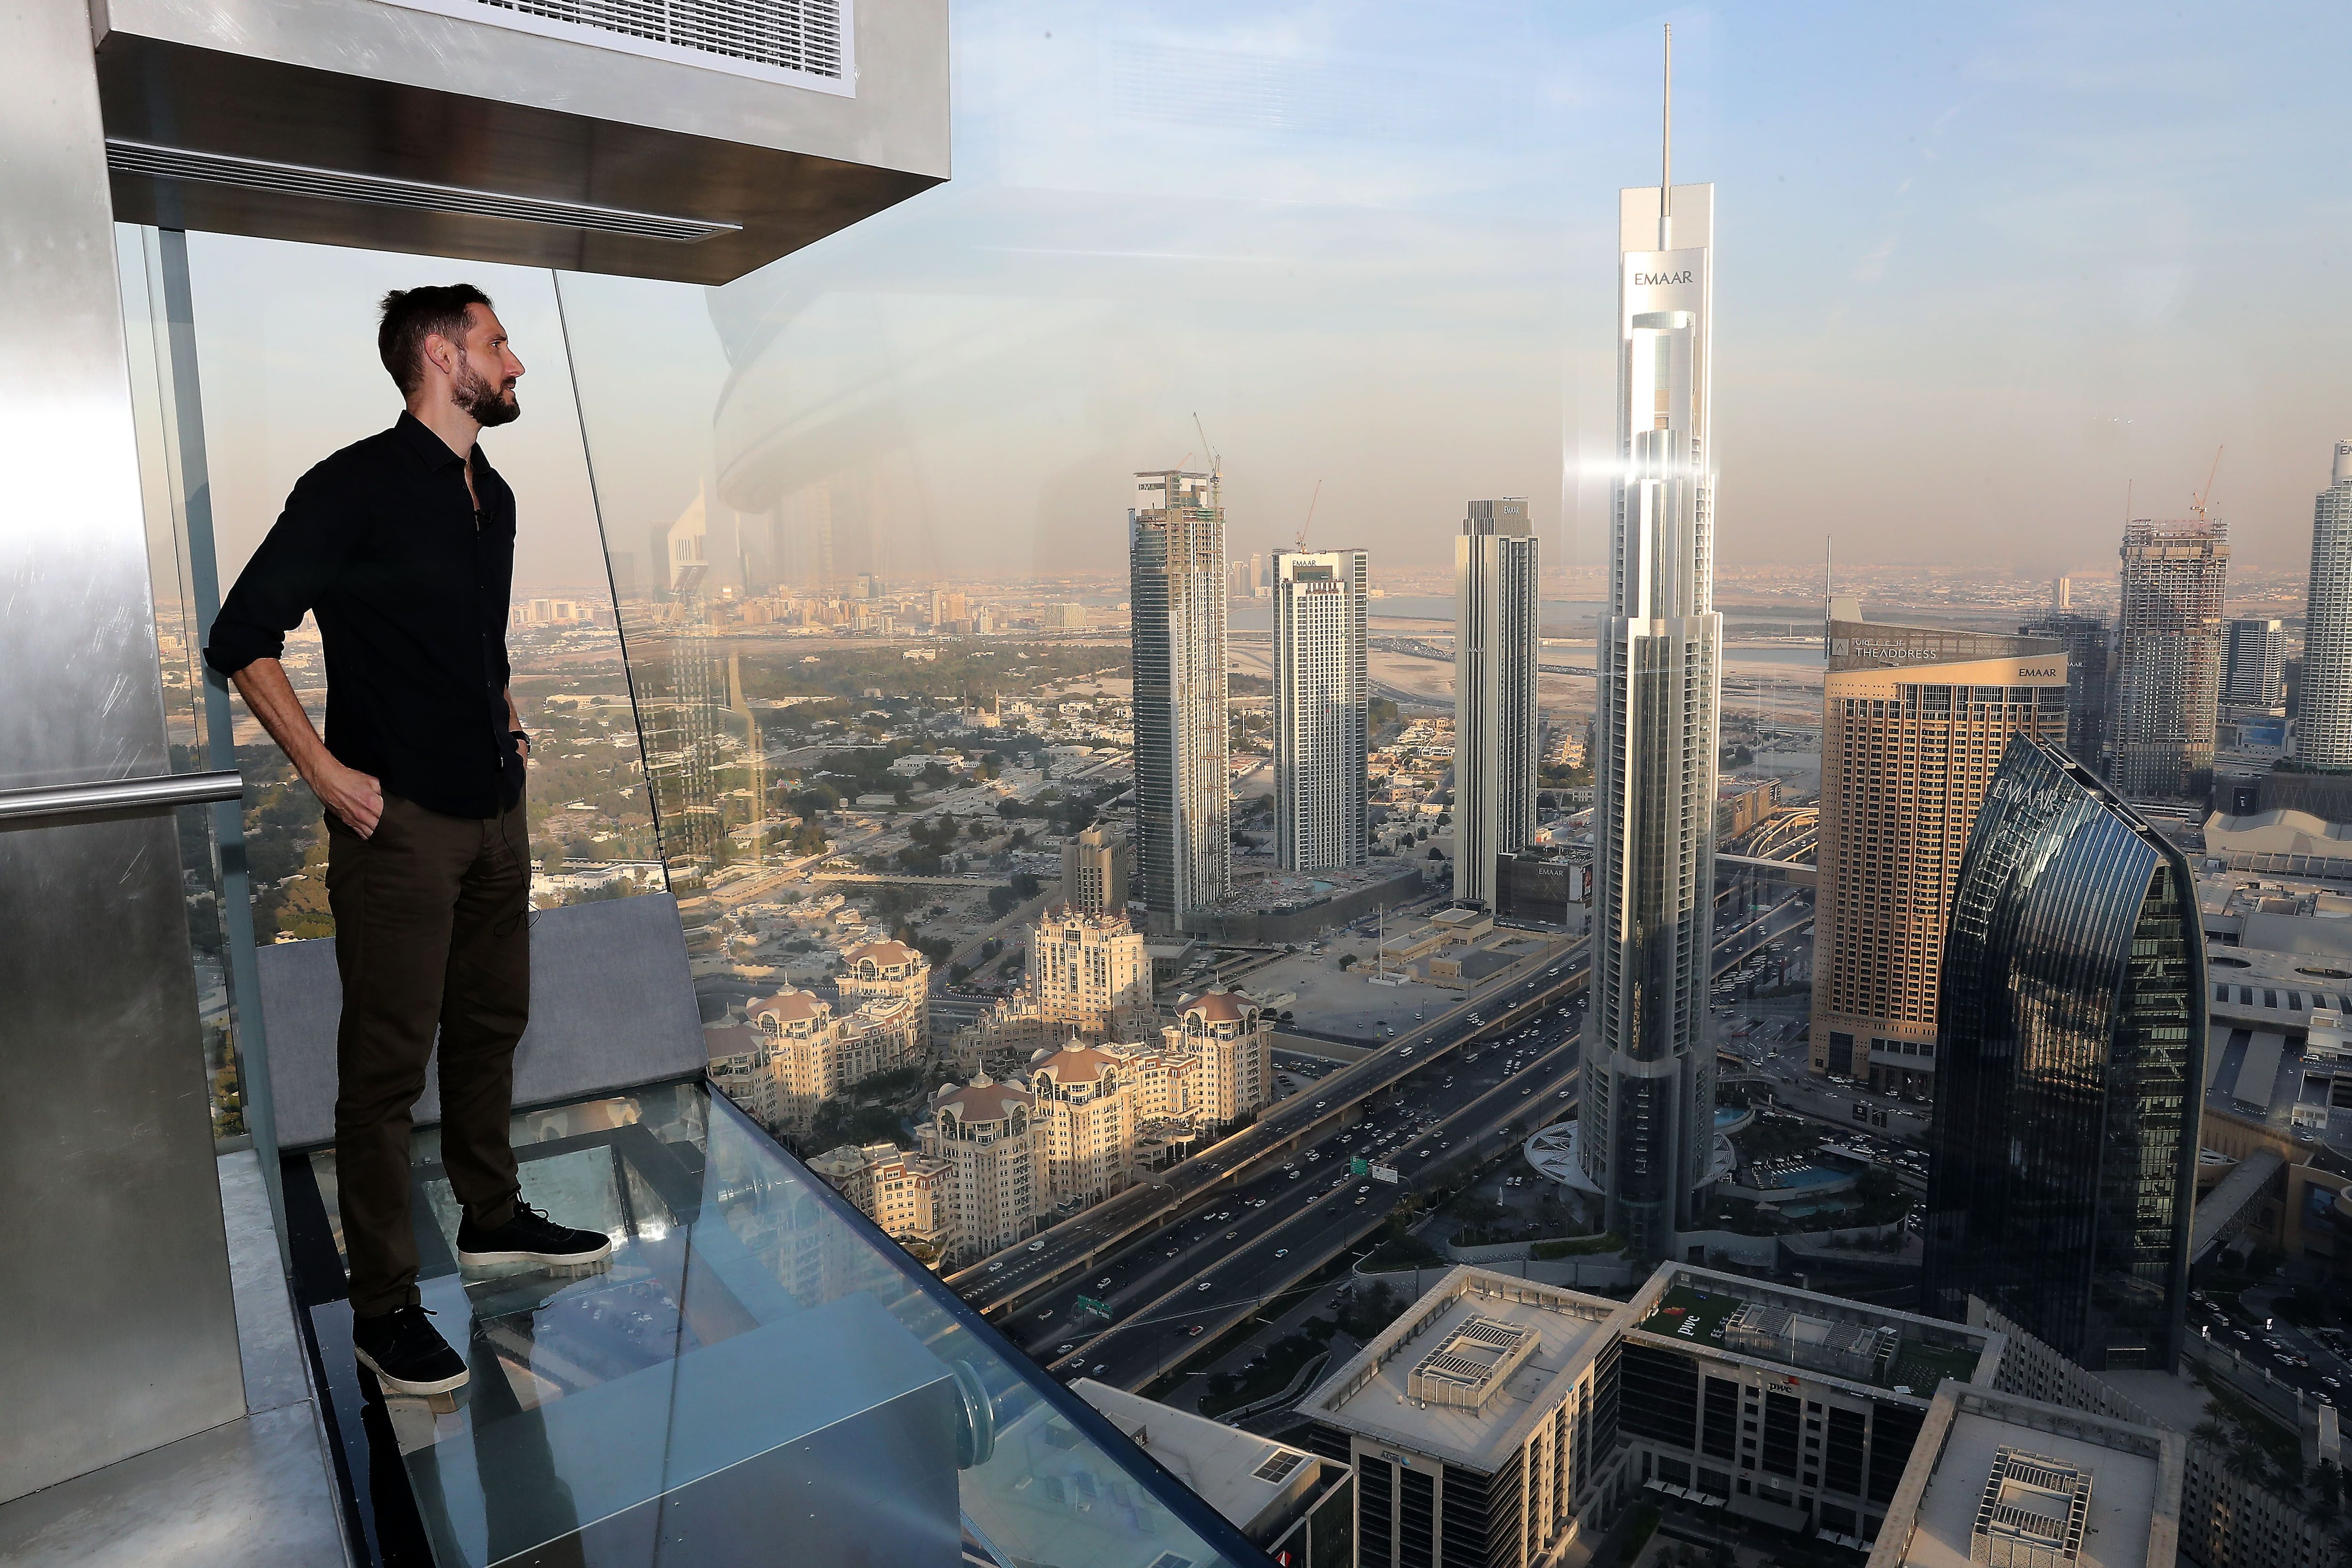 Sky Views Dubai review: what it's like to walk 219 metres above the city